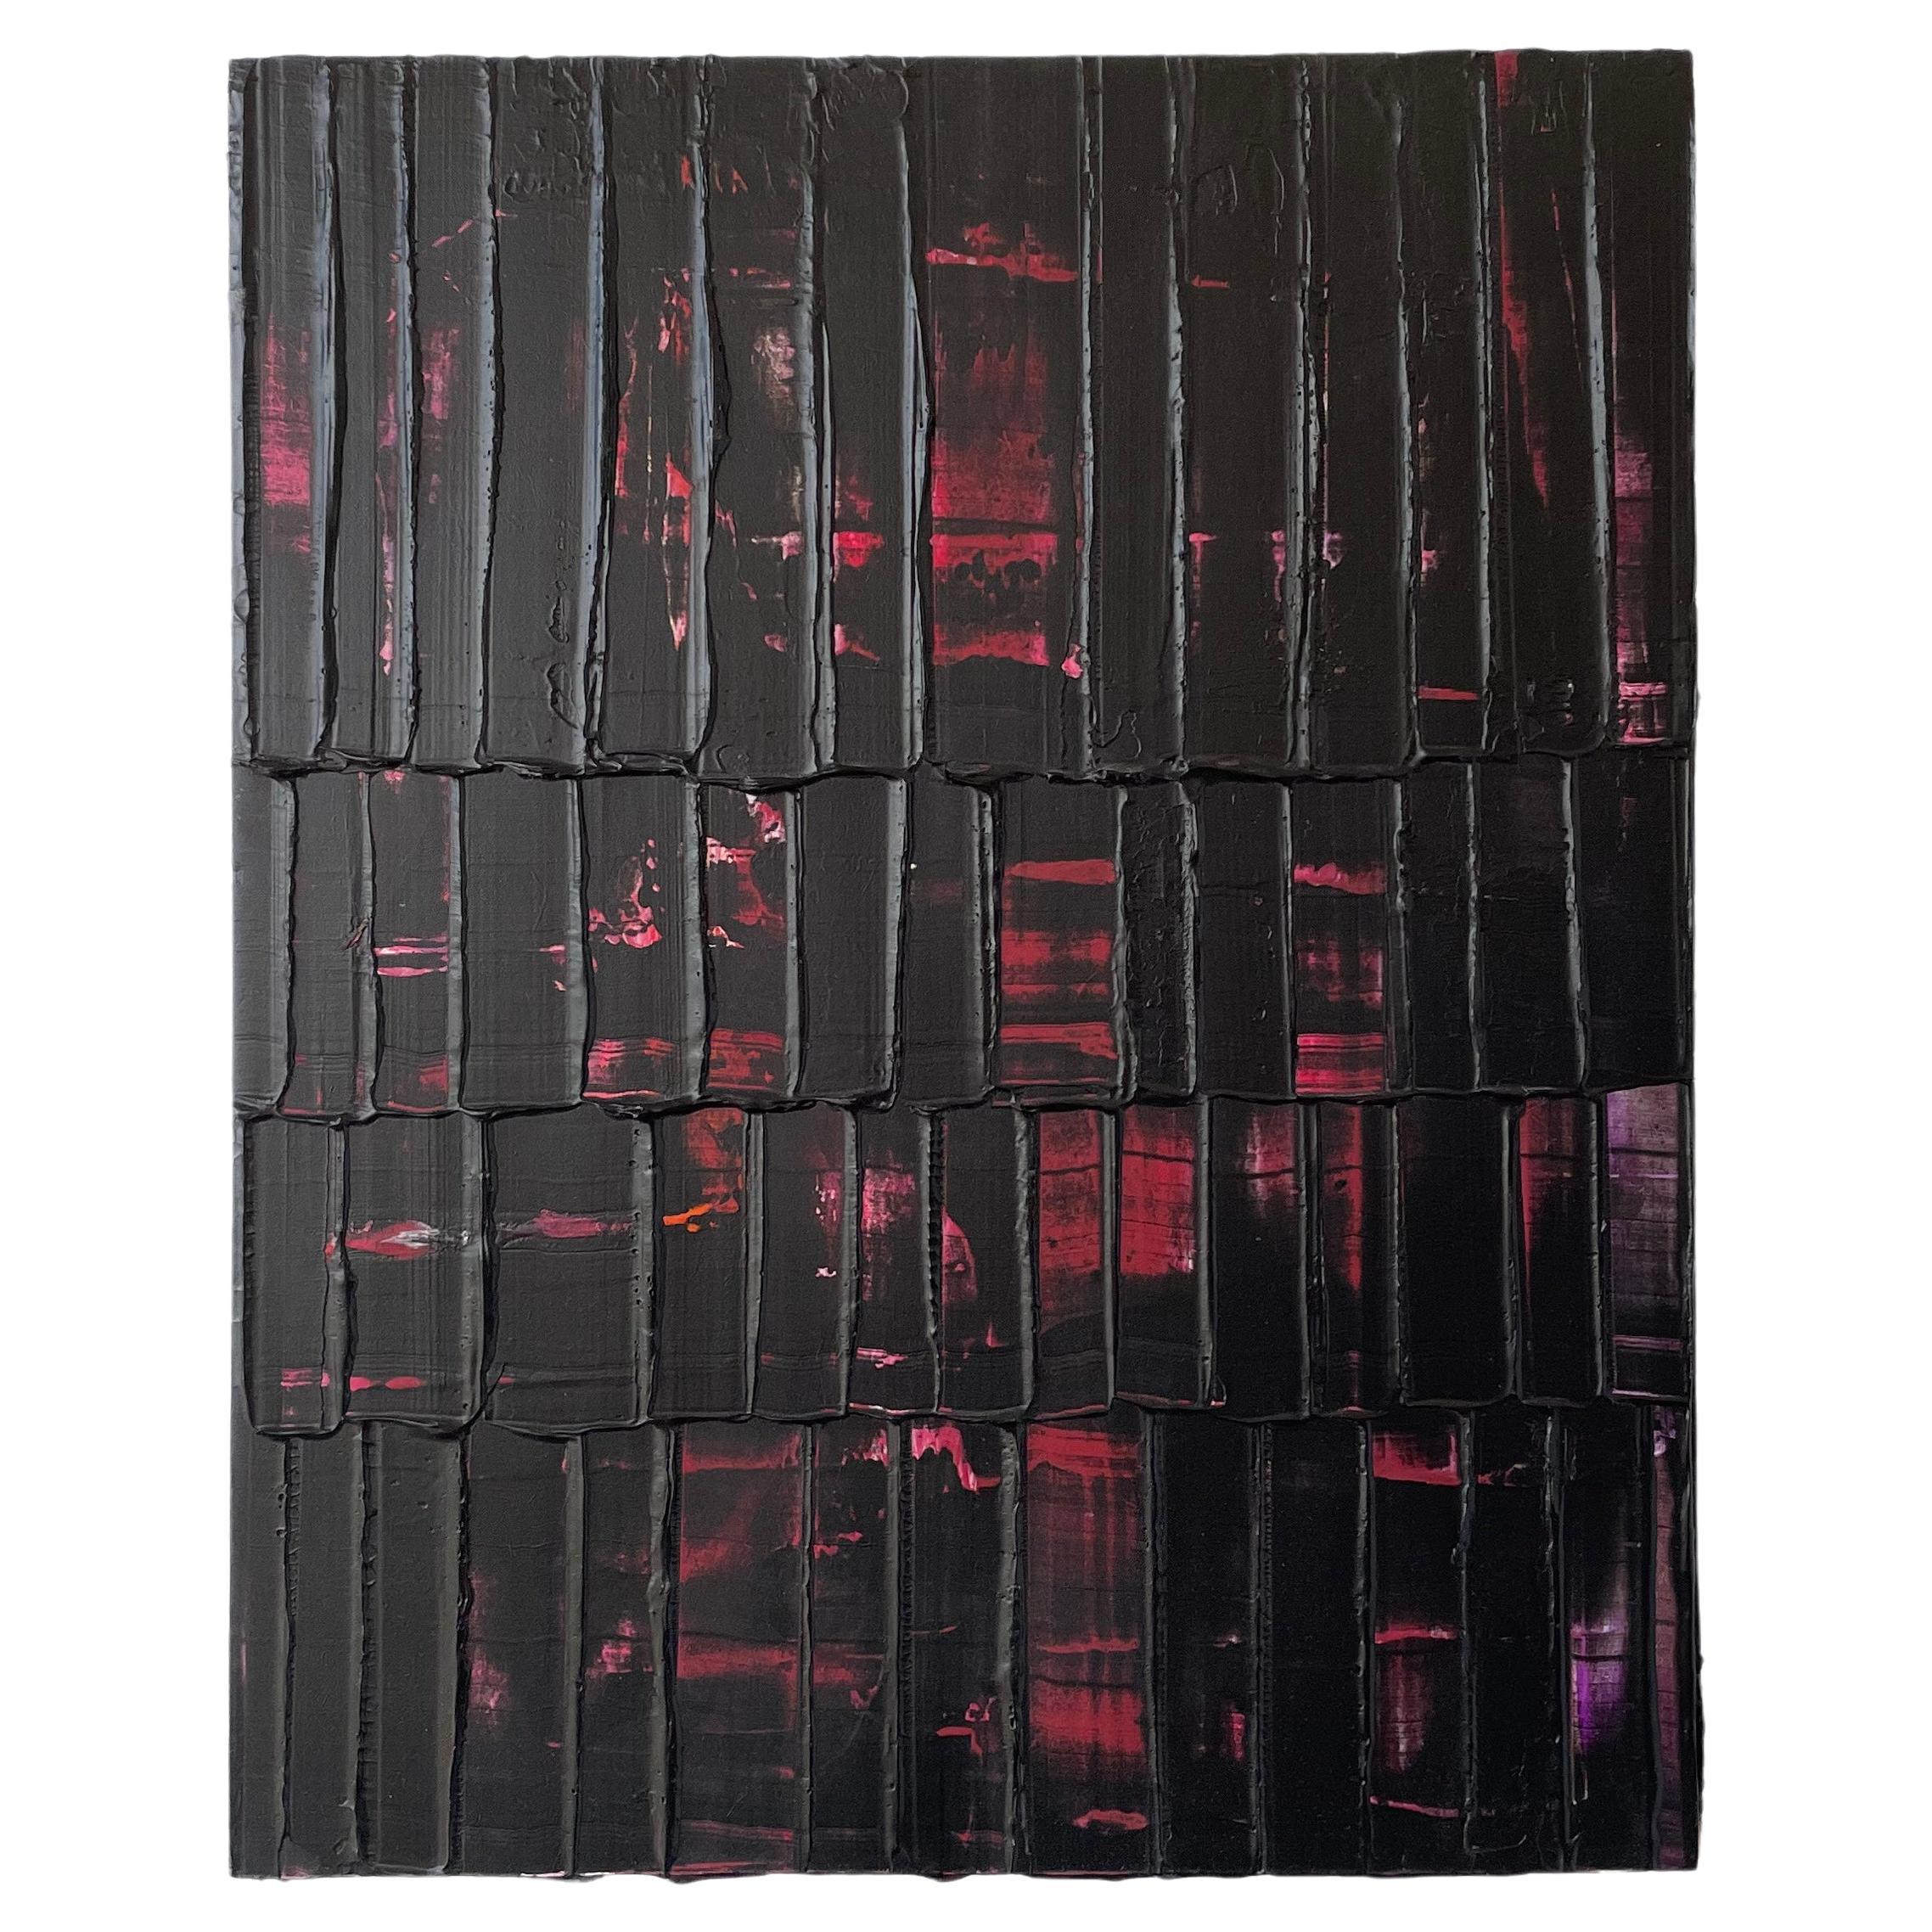 Painting by Roan Barrion 'Untitled Abstract 002' For Sale